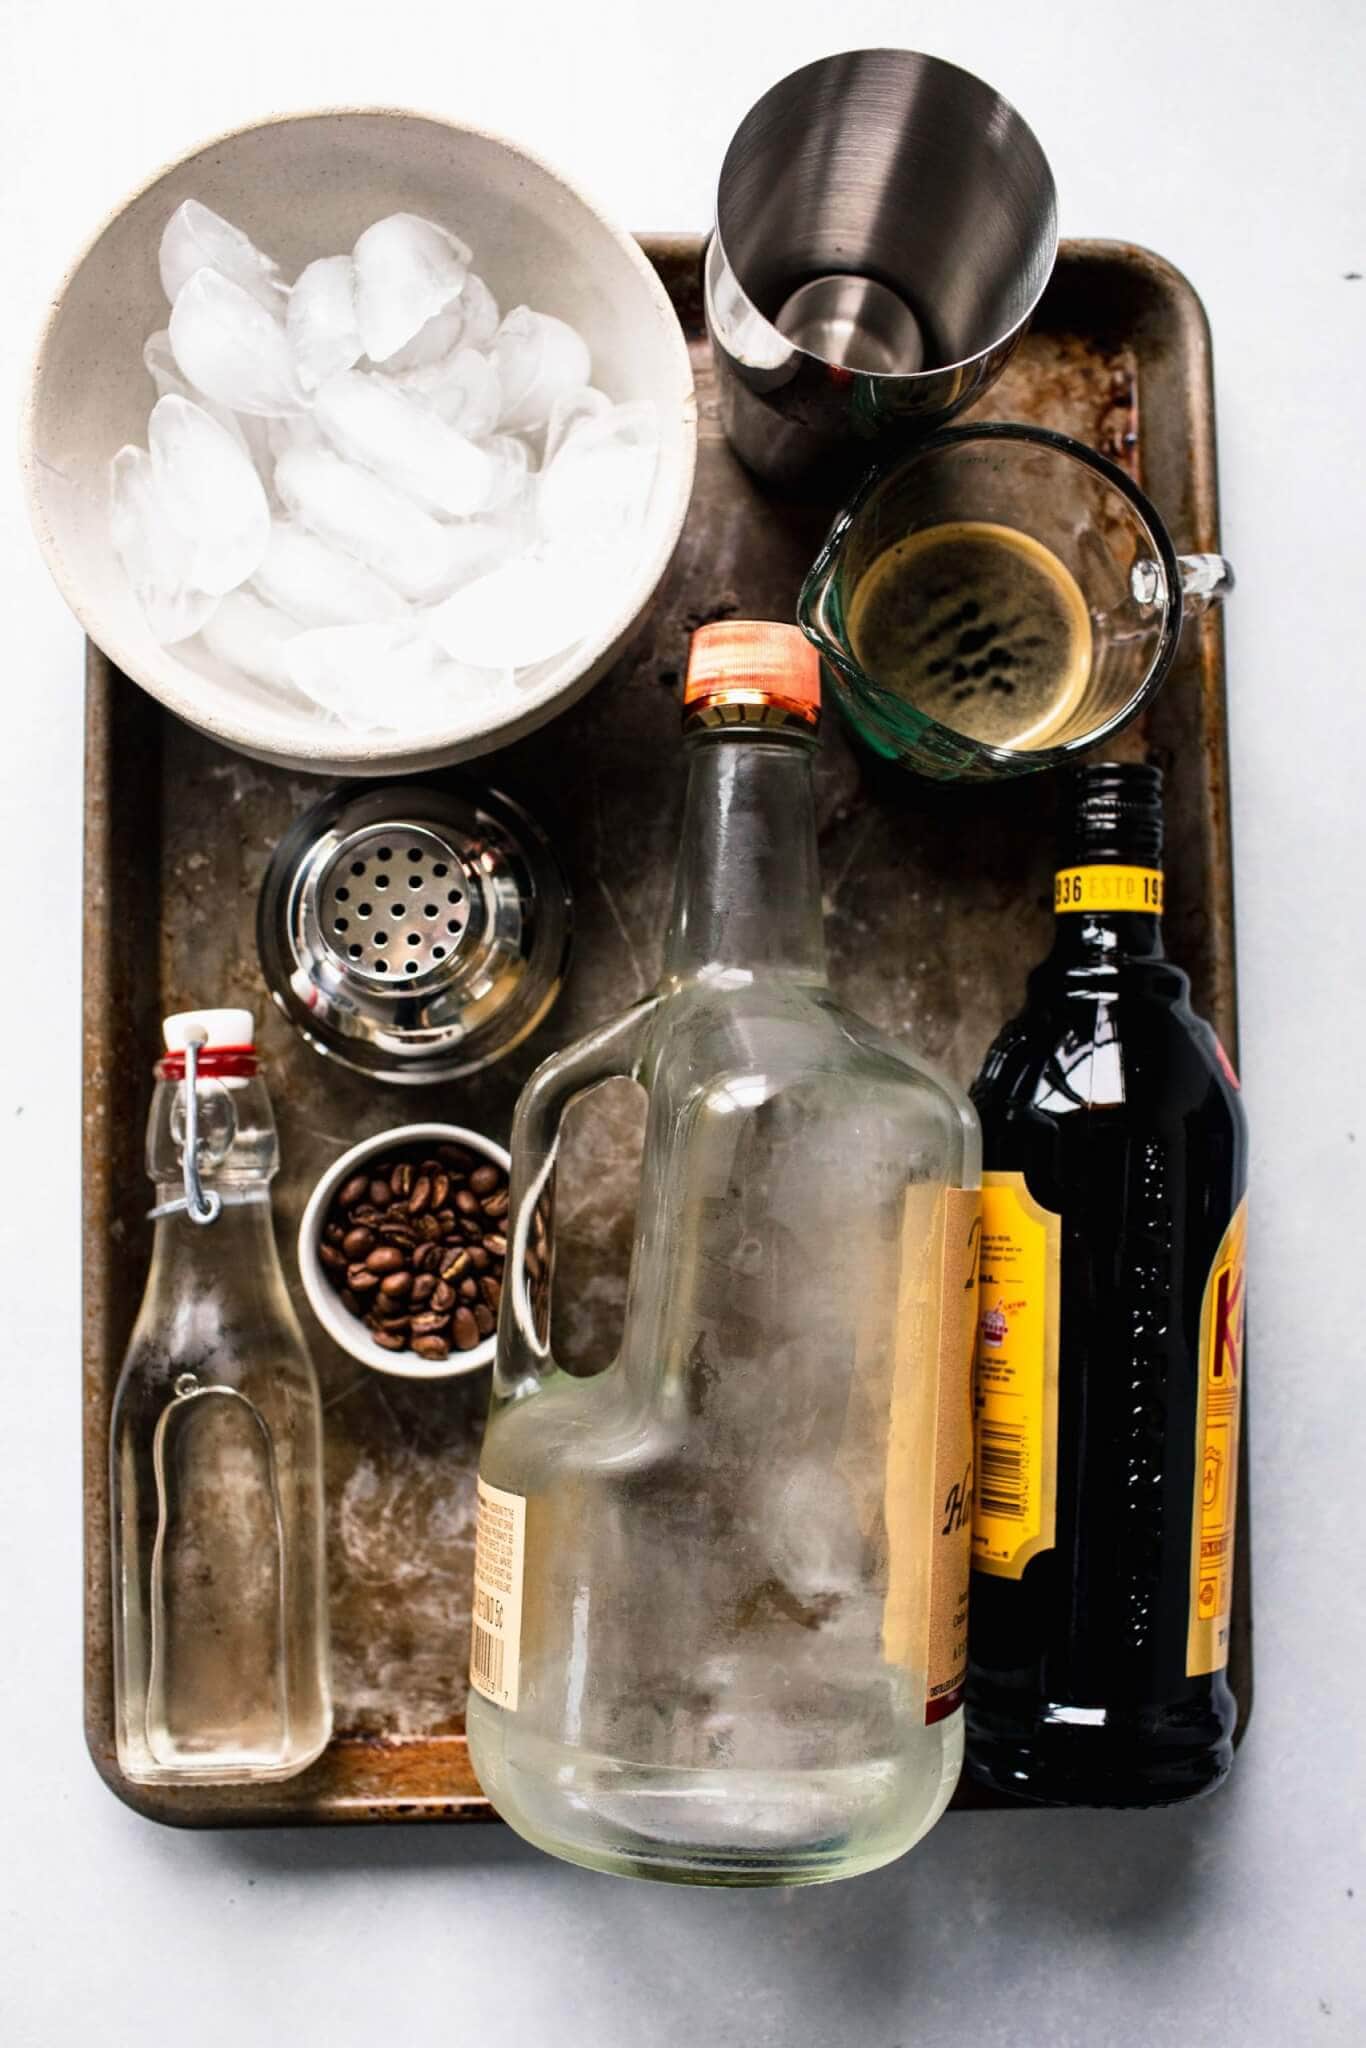 Ingredients for espresso martini laid out on tray.